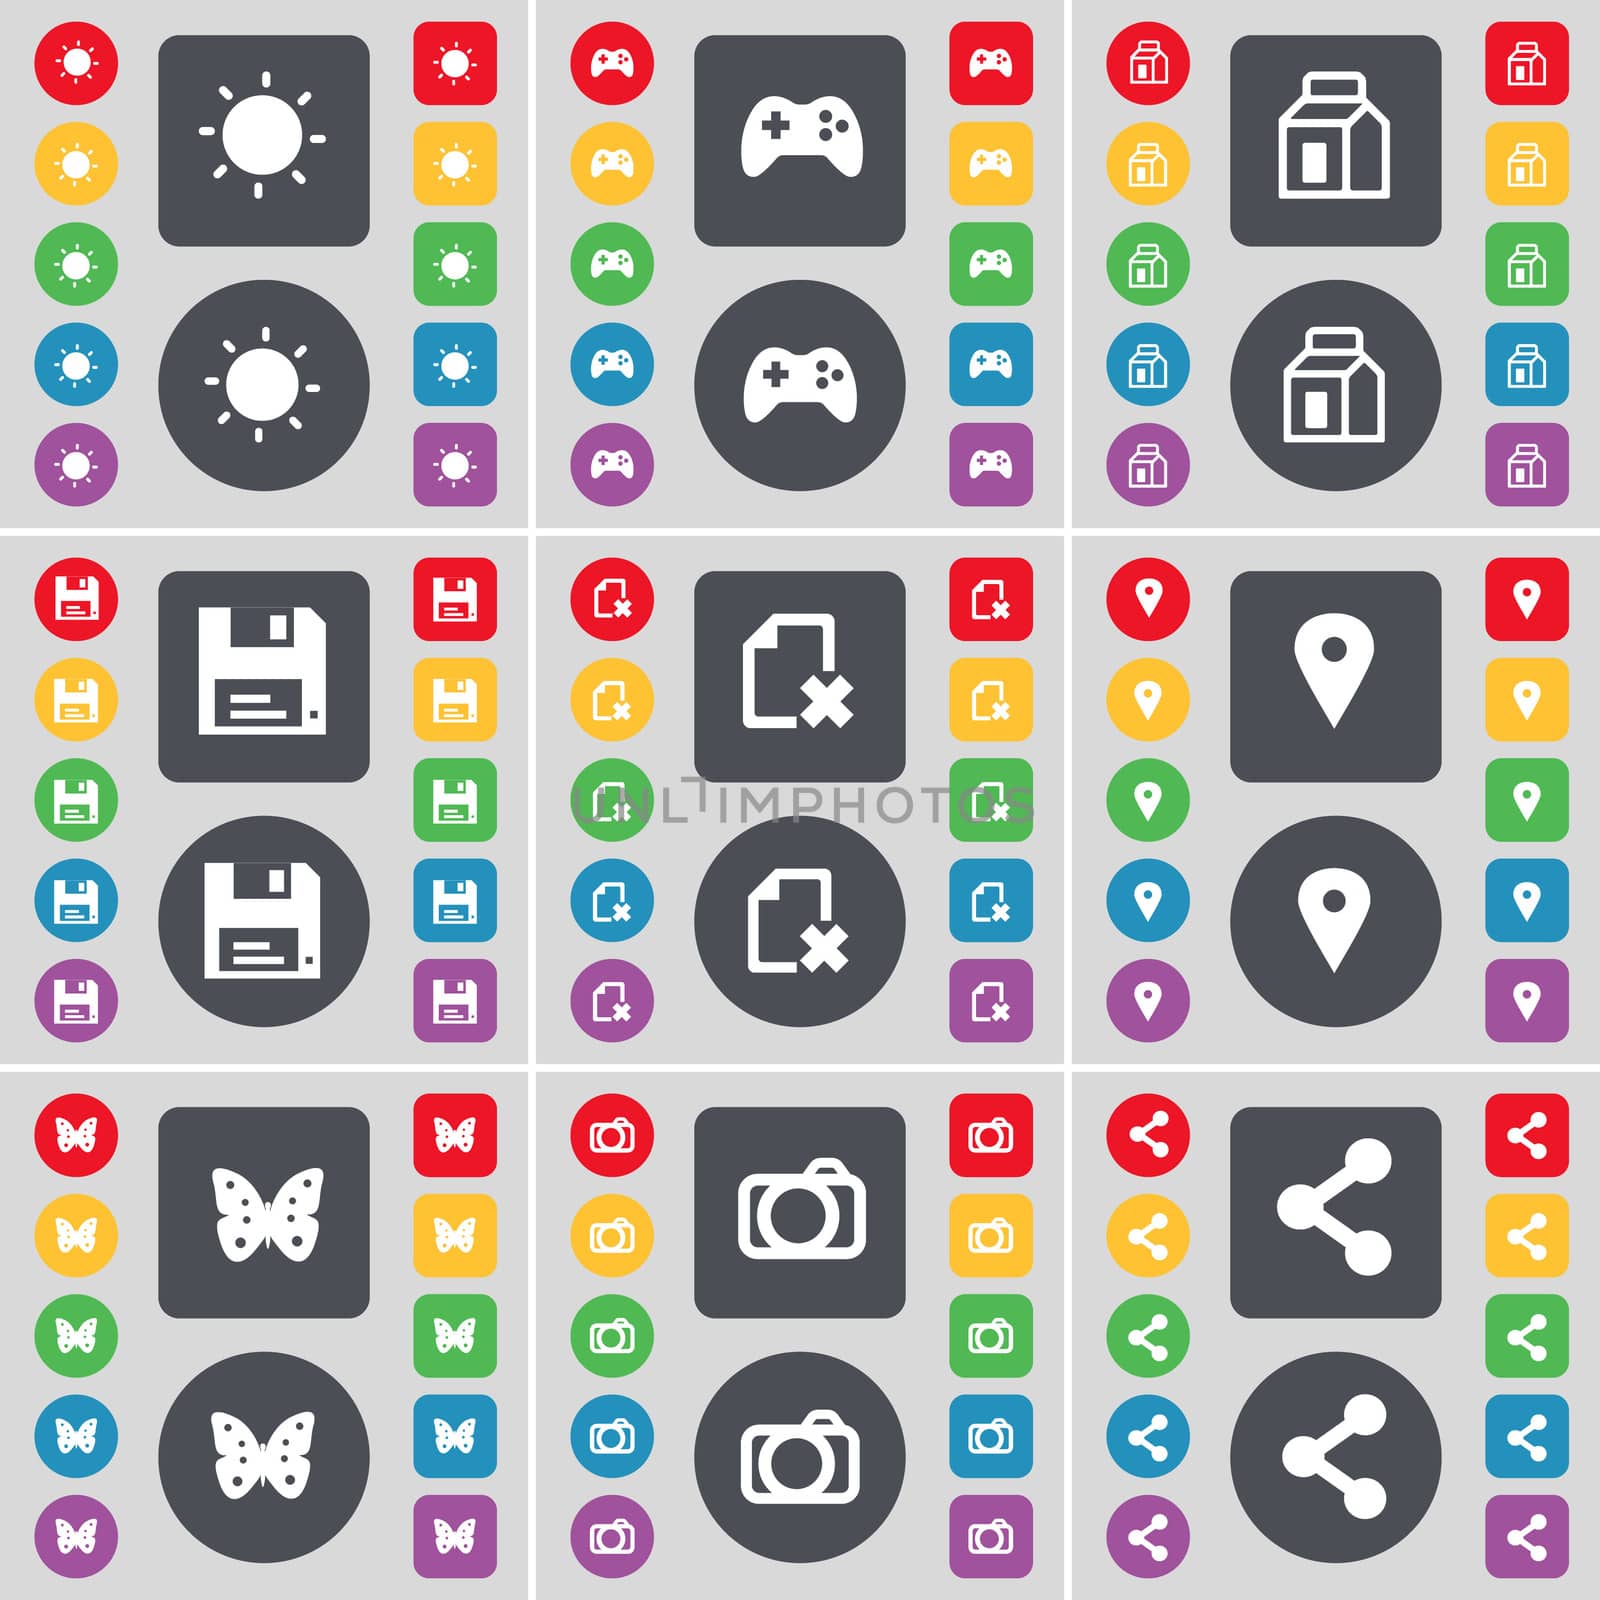 Light, Gamepad, Packing, Floppy, File, Checkpoint, Butterfly, Camera, Share icon symbol. A large set of flat, colored buttons for your design.  by serhii_lohvyniuk